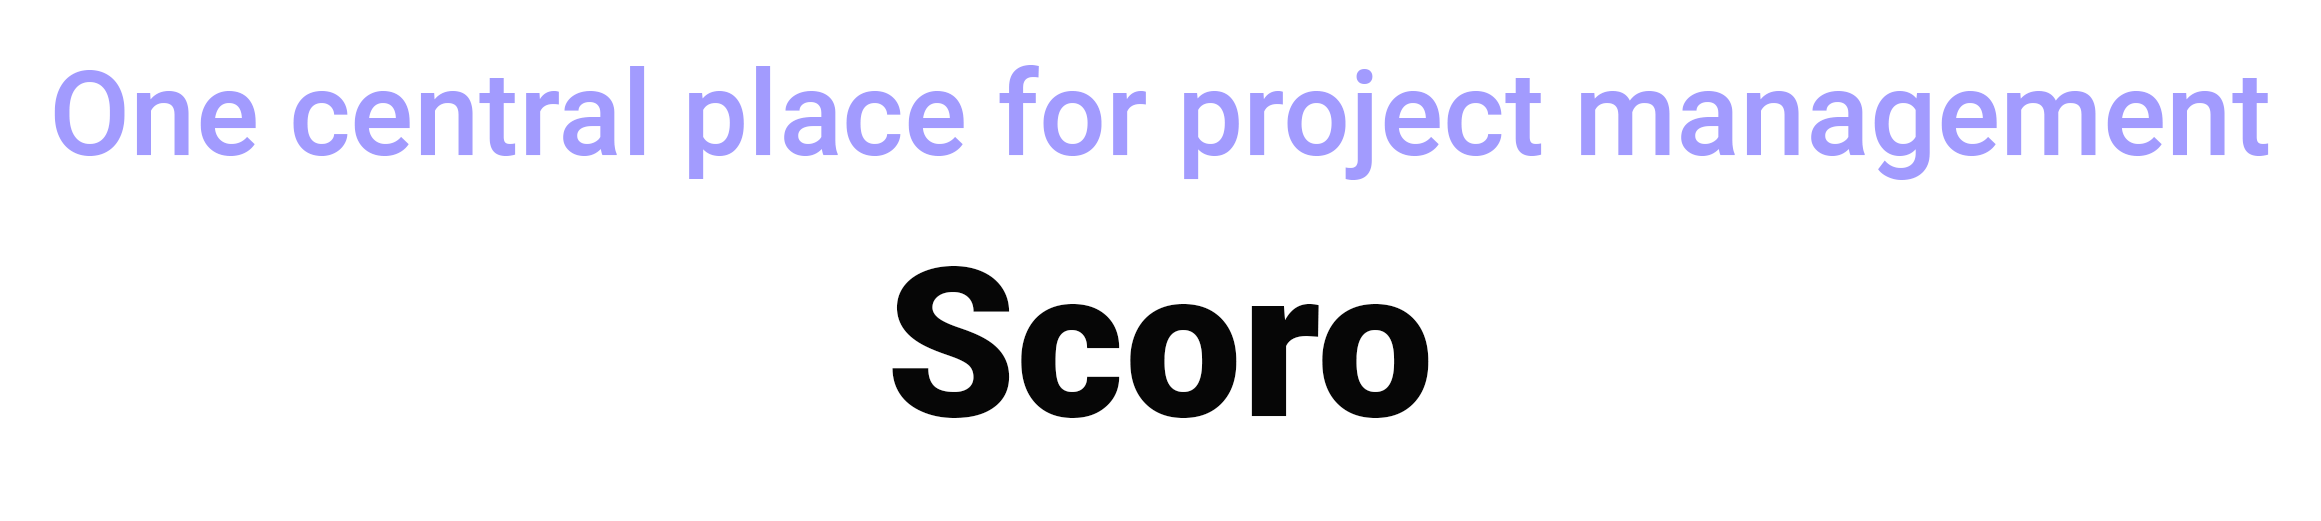 One central place for project management SCORO virtual team management tools